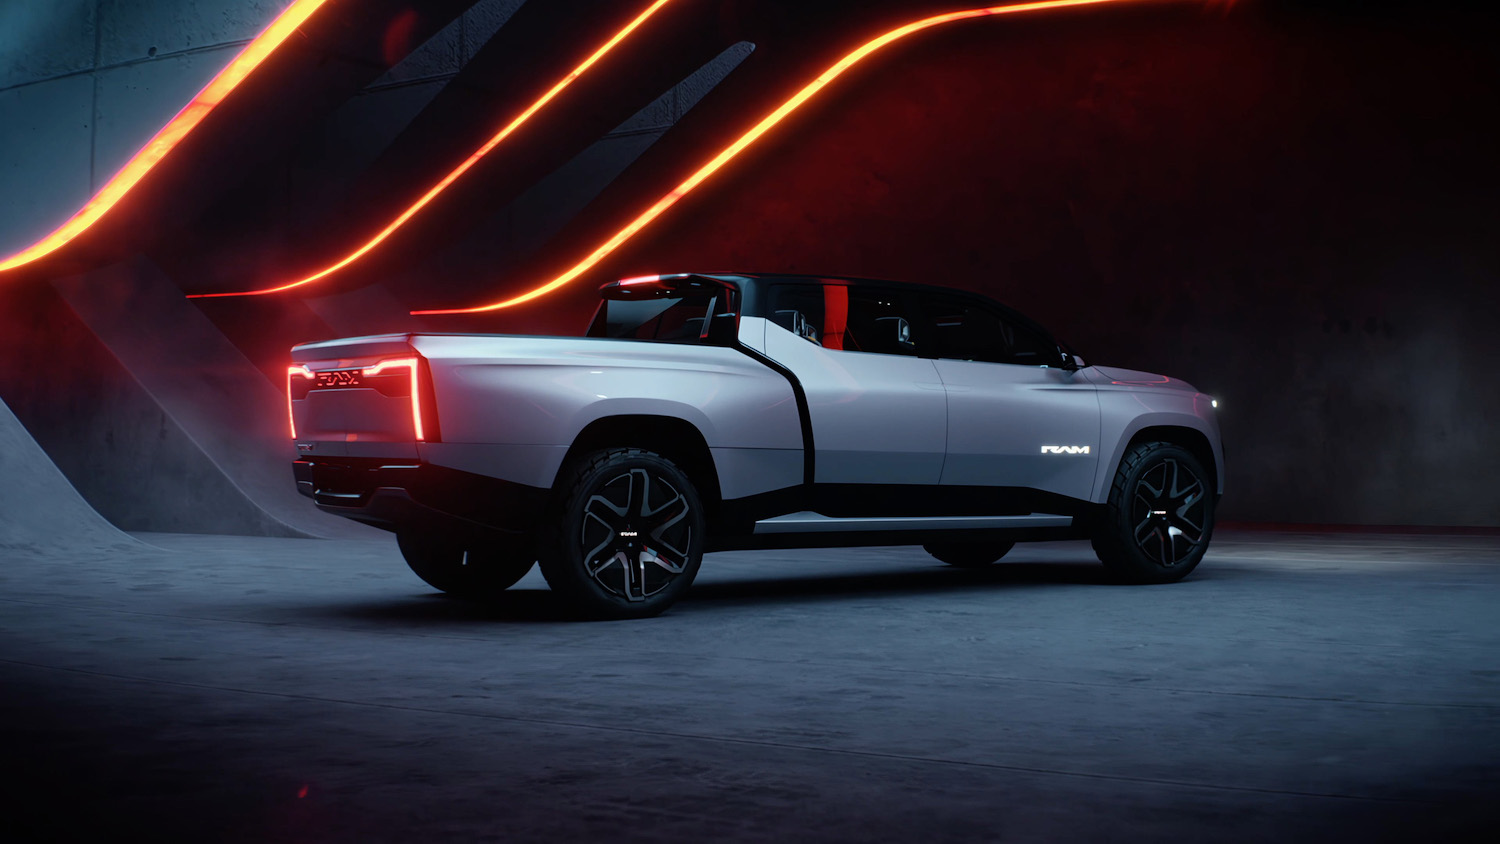 A promo render of the 2024 Ram 1500 Revolution electric pickup truck which may offer much more ground clearance than the current 2500 Power Wagon